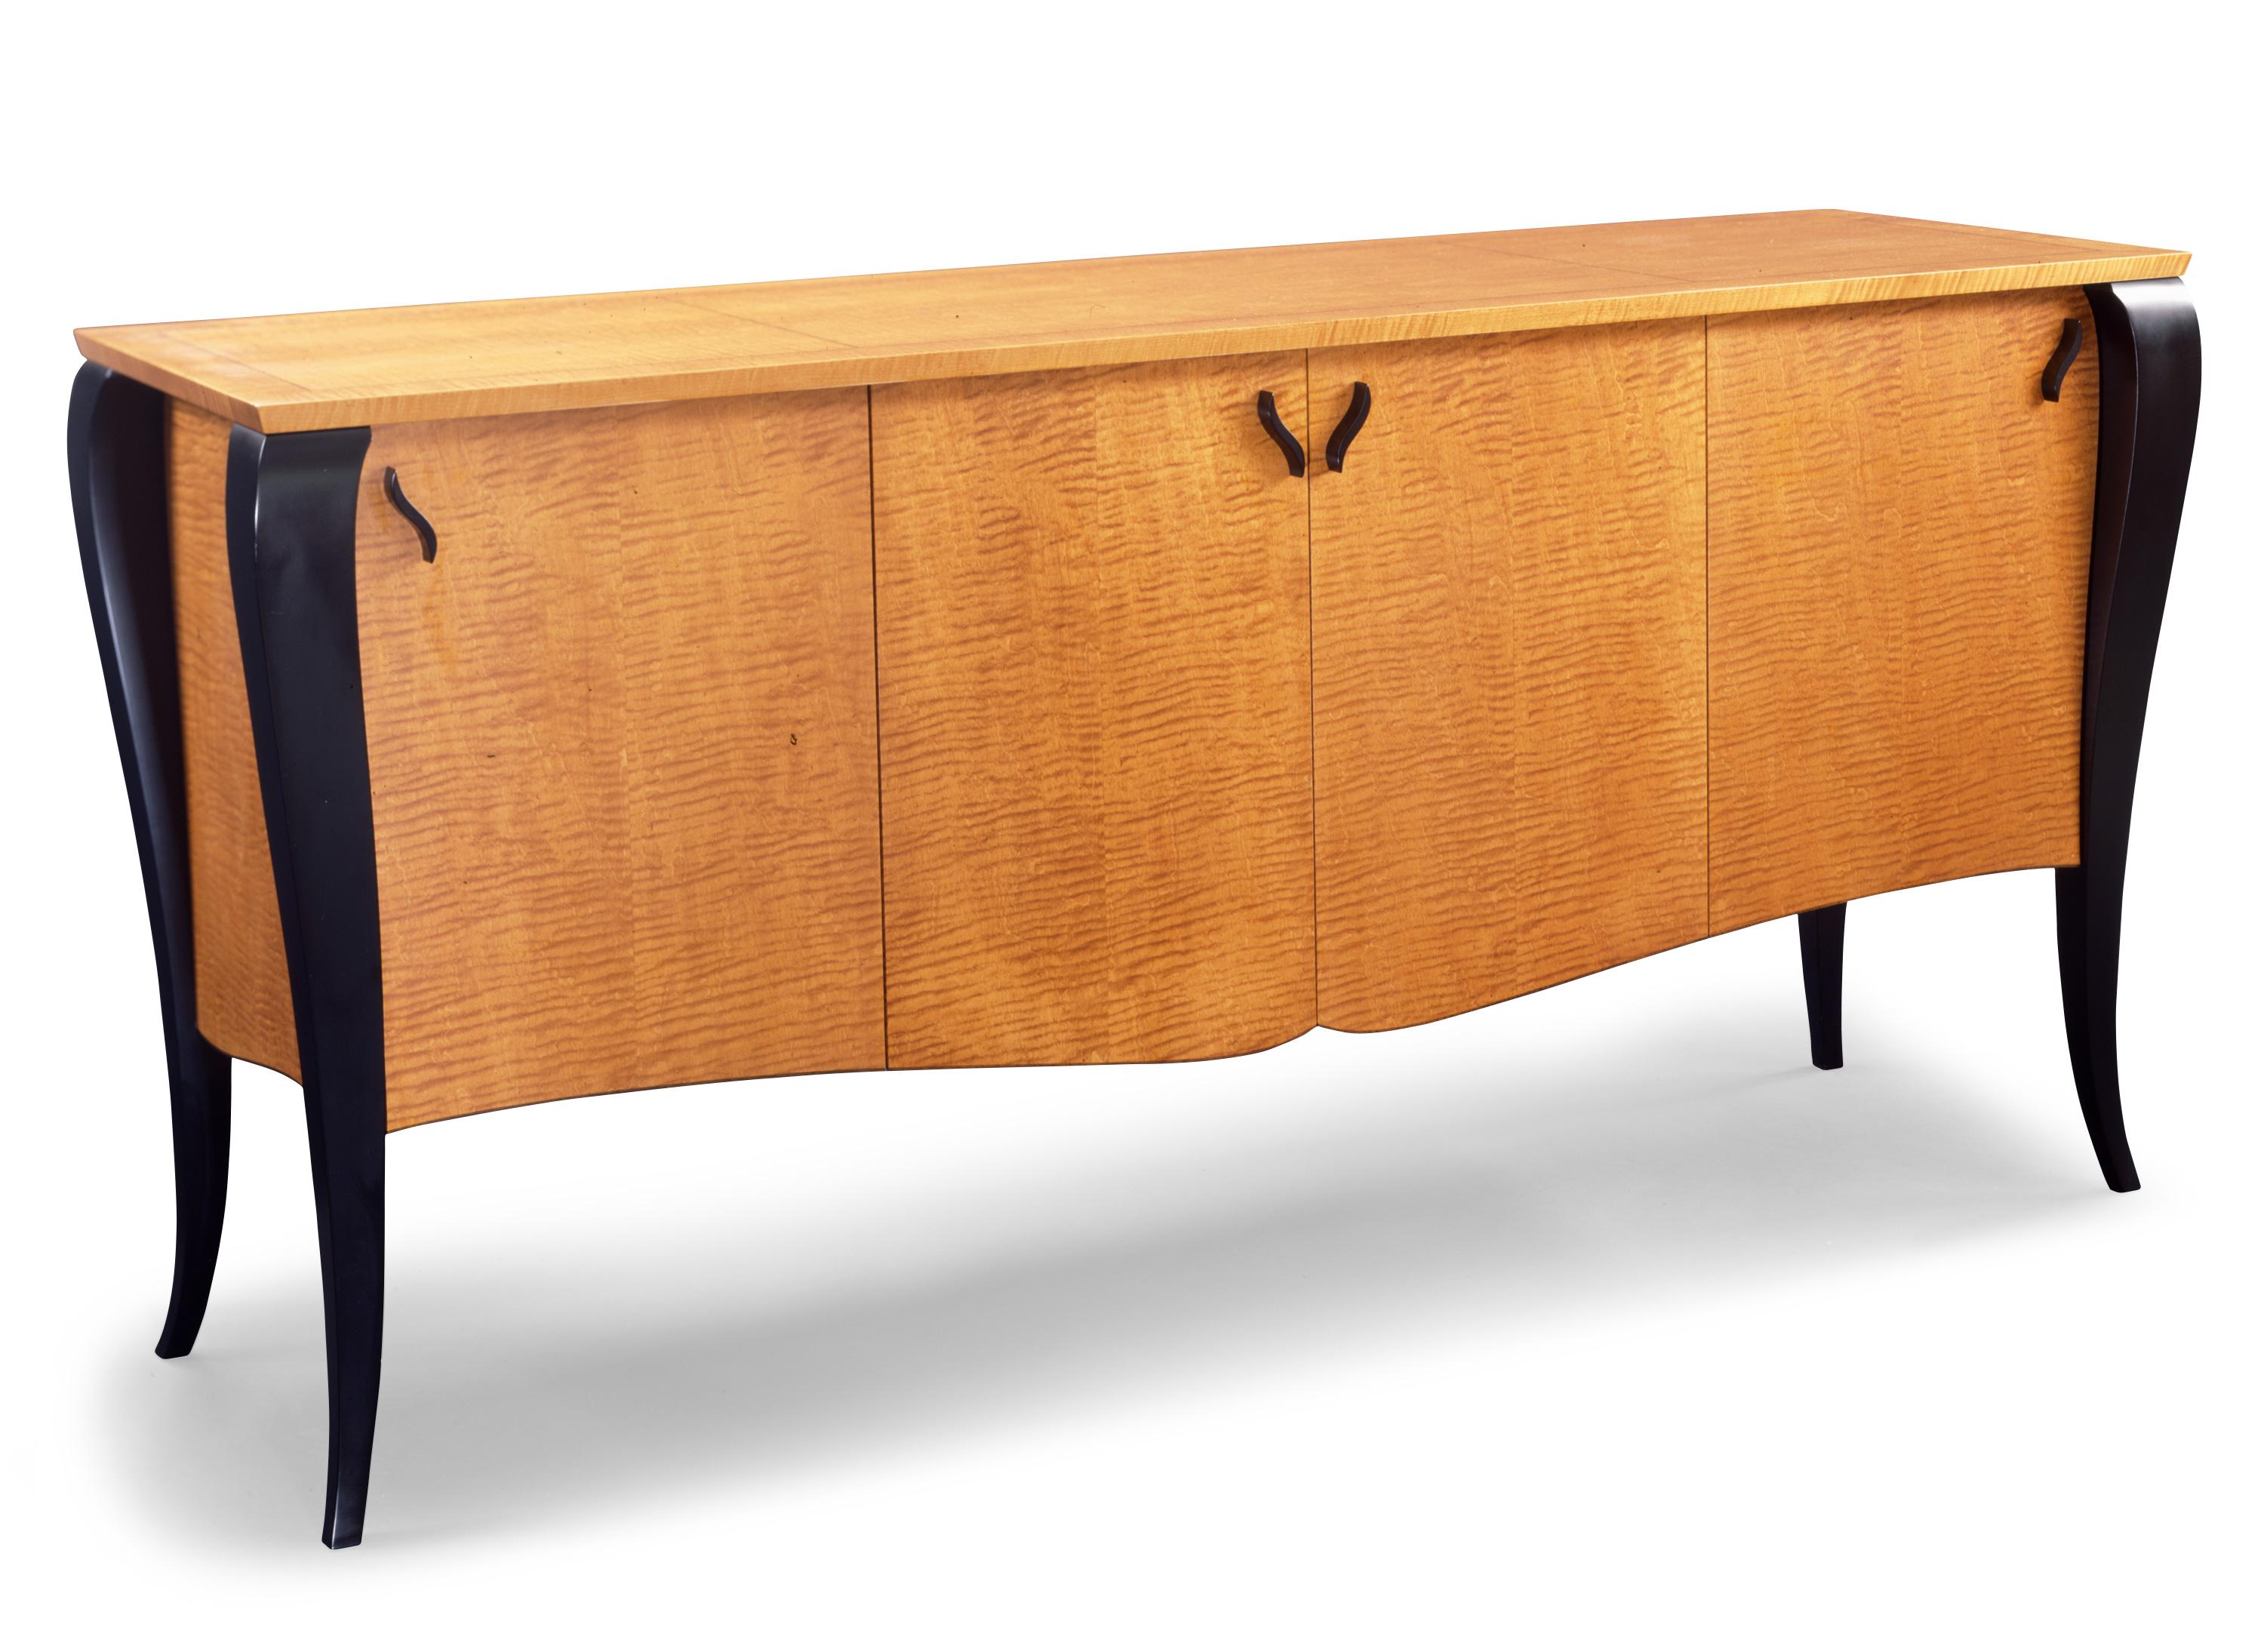 By referencing and redesigning the cabriole leg we have created our own iconic Gazelle collection. A contemporary and yet transitional design that will find its place in many environments. The Gazelle Sideboard can be reconfigured to your